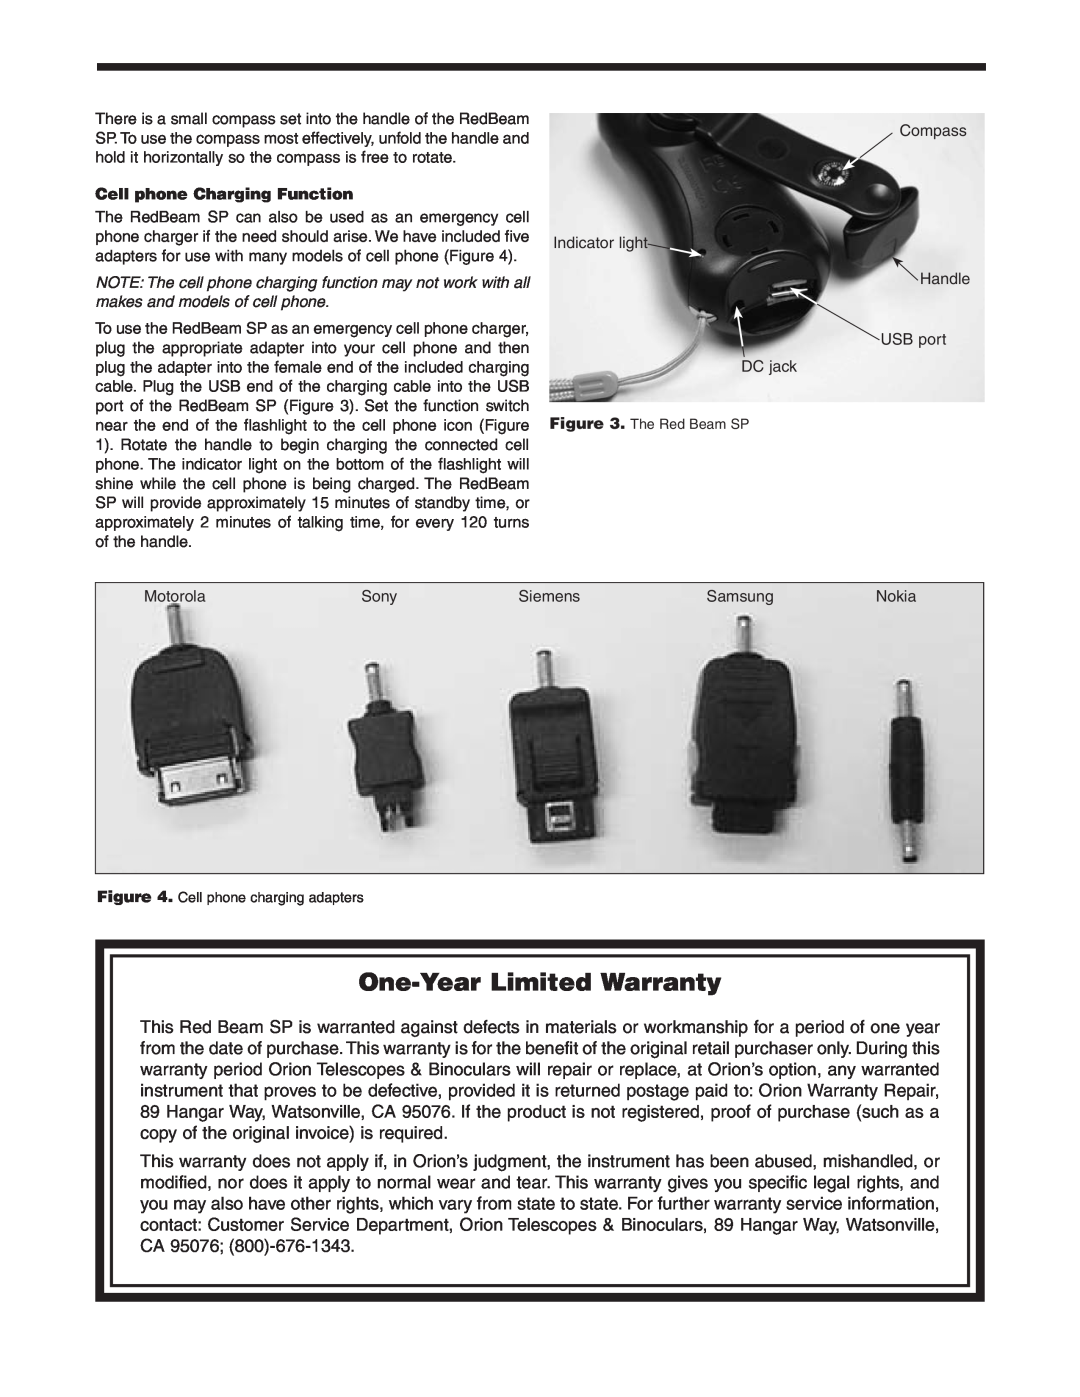 Orion #5762 instruction manual One-YearLimited Warranty, Cell phone Charging Function 